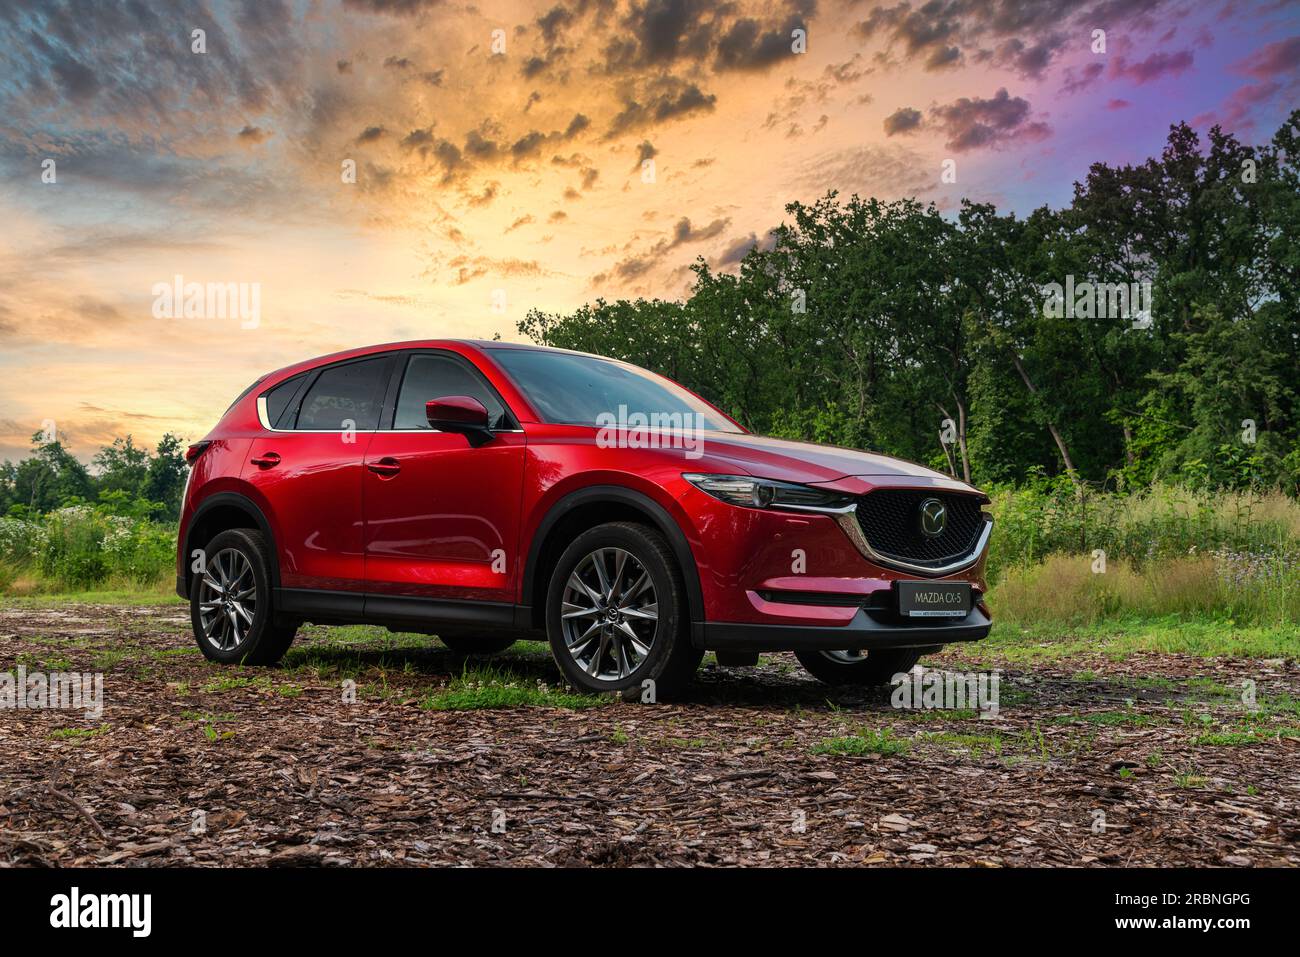 Ukraine - July 4, 2021: New red Mazda CX-5 in the forest at sunset Stock Photo